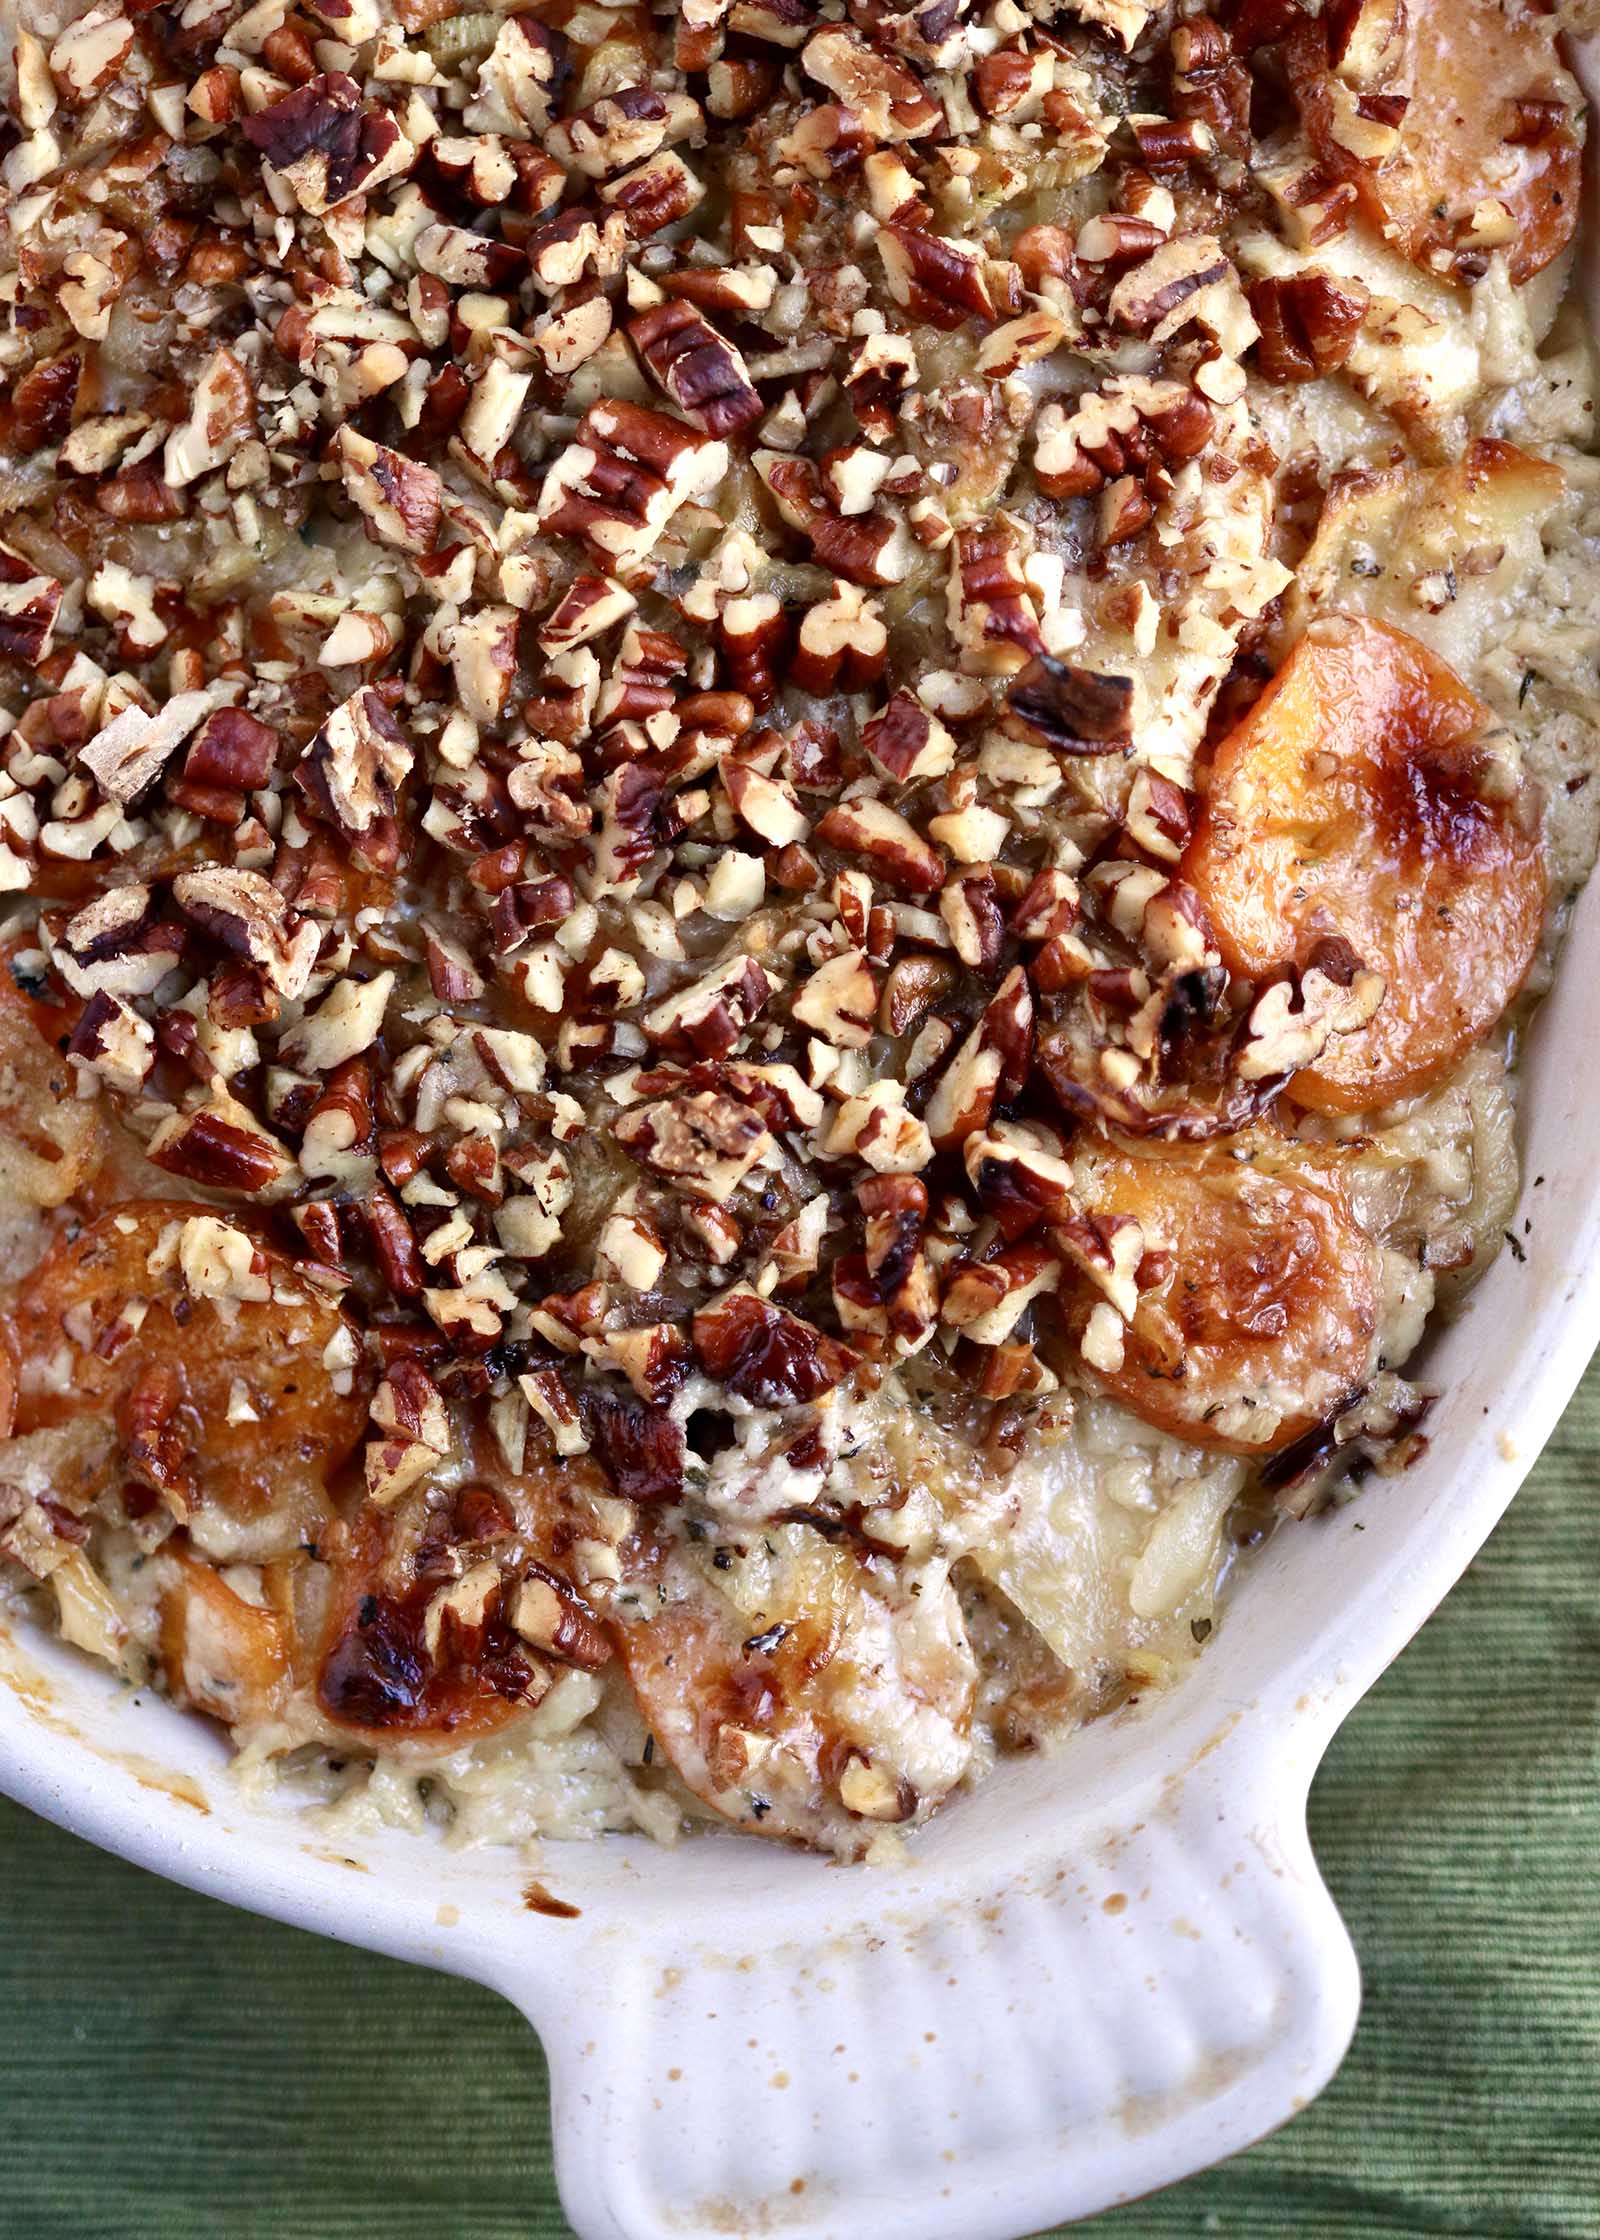 Thanksgiving Root Vegetable Gratin topped with chopped nuts and served in a casserole dish.